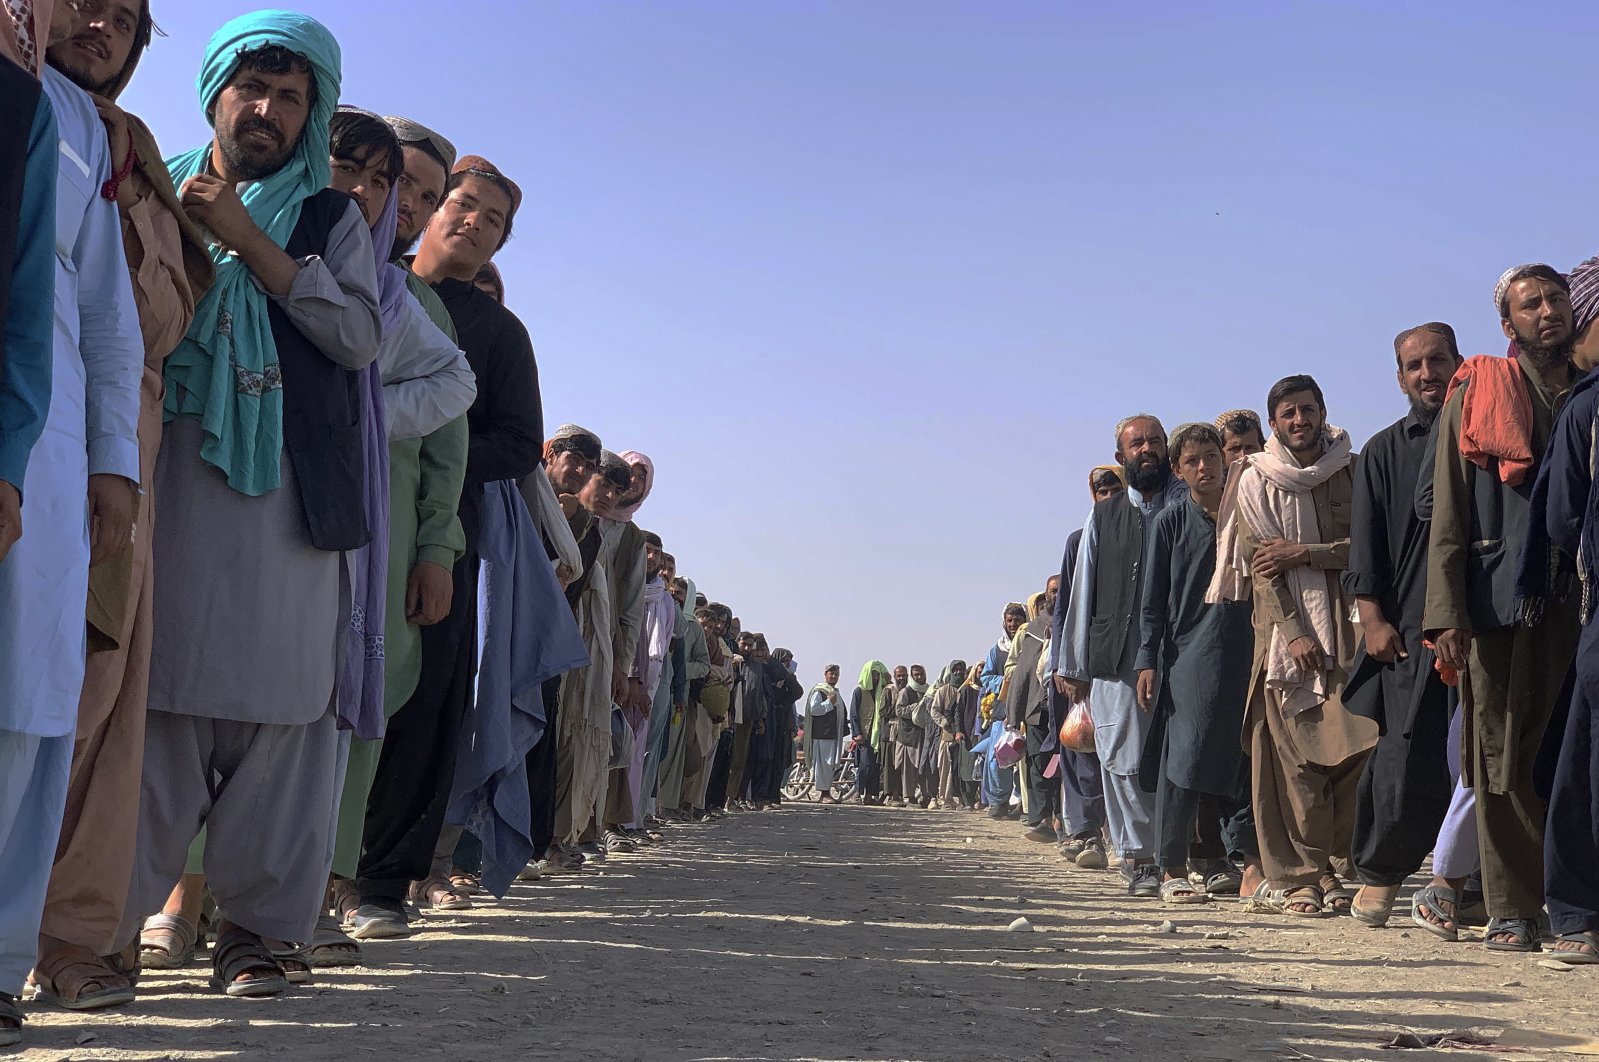 Afghan nationals line up and wait for security checks in Pakistan before entering Afghanistan through a common border crossing point in Chaman, Pakistan, Aug. 26, 2021. (AP Photo)